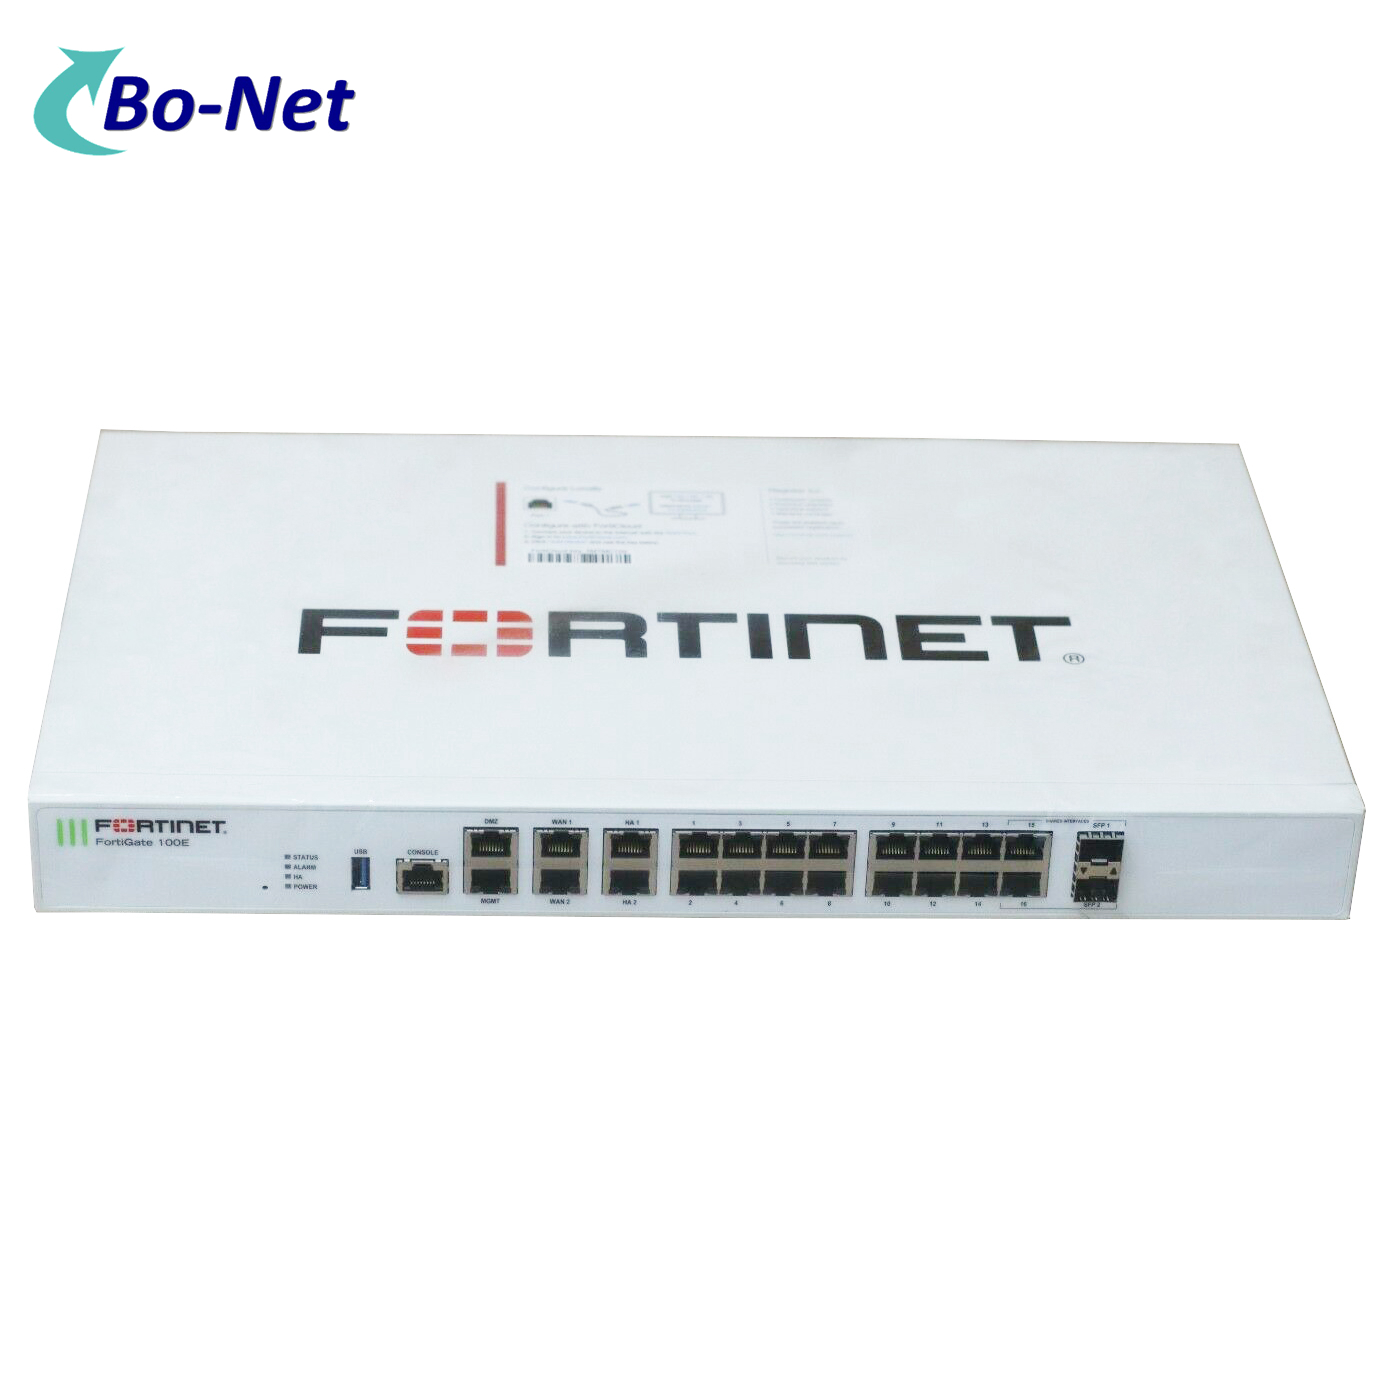 New Fortinet FG-100E FortiGate 100E 20 x GE RJ45 Ports Network Firewall  Security-Fortinet-Cisco network switch,Cisco Router, NEW used Cisco  comparison